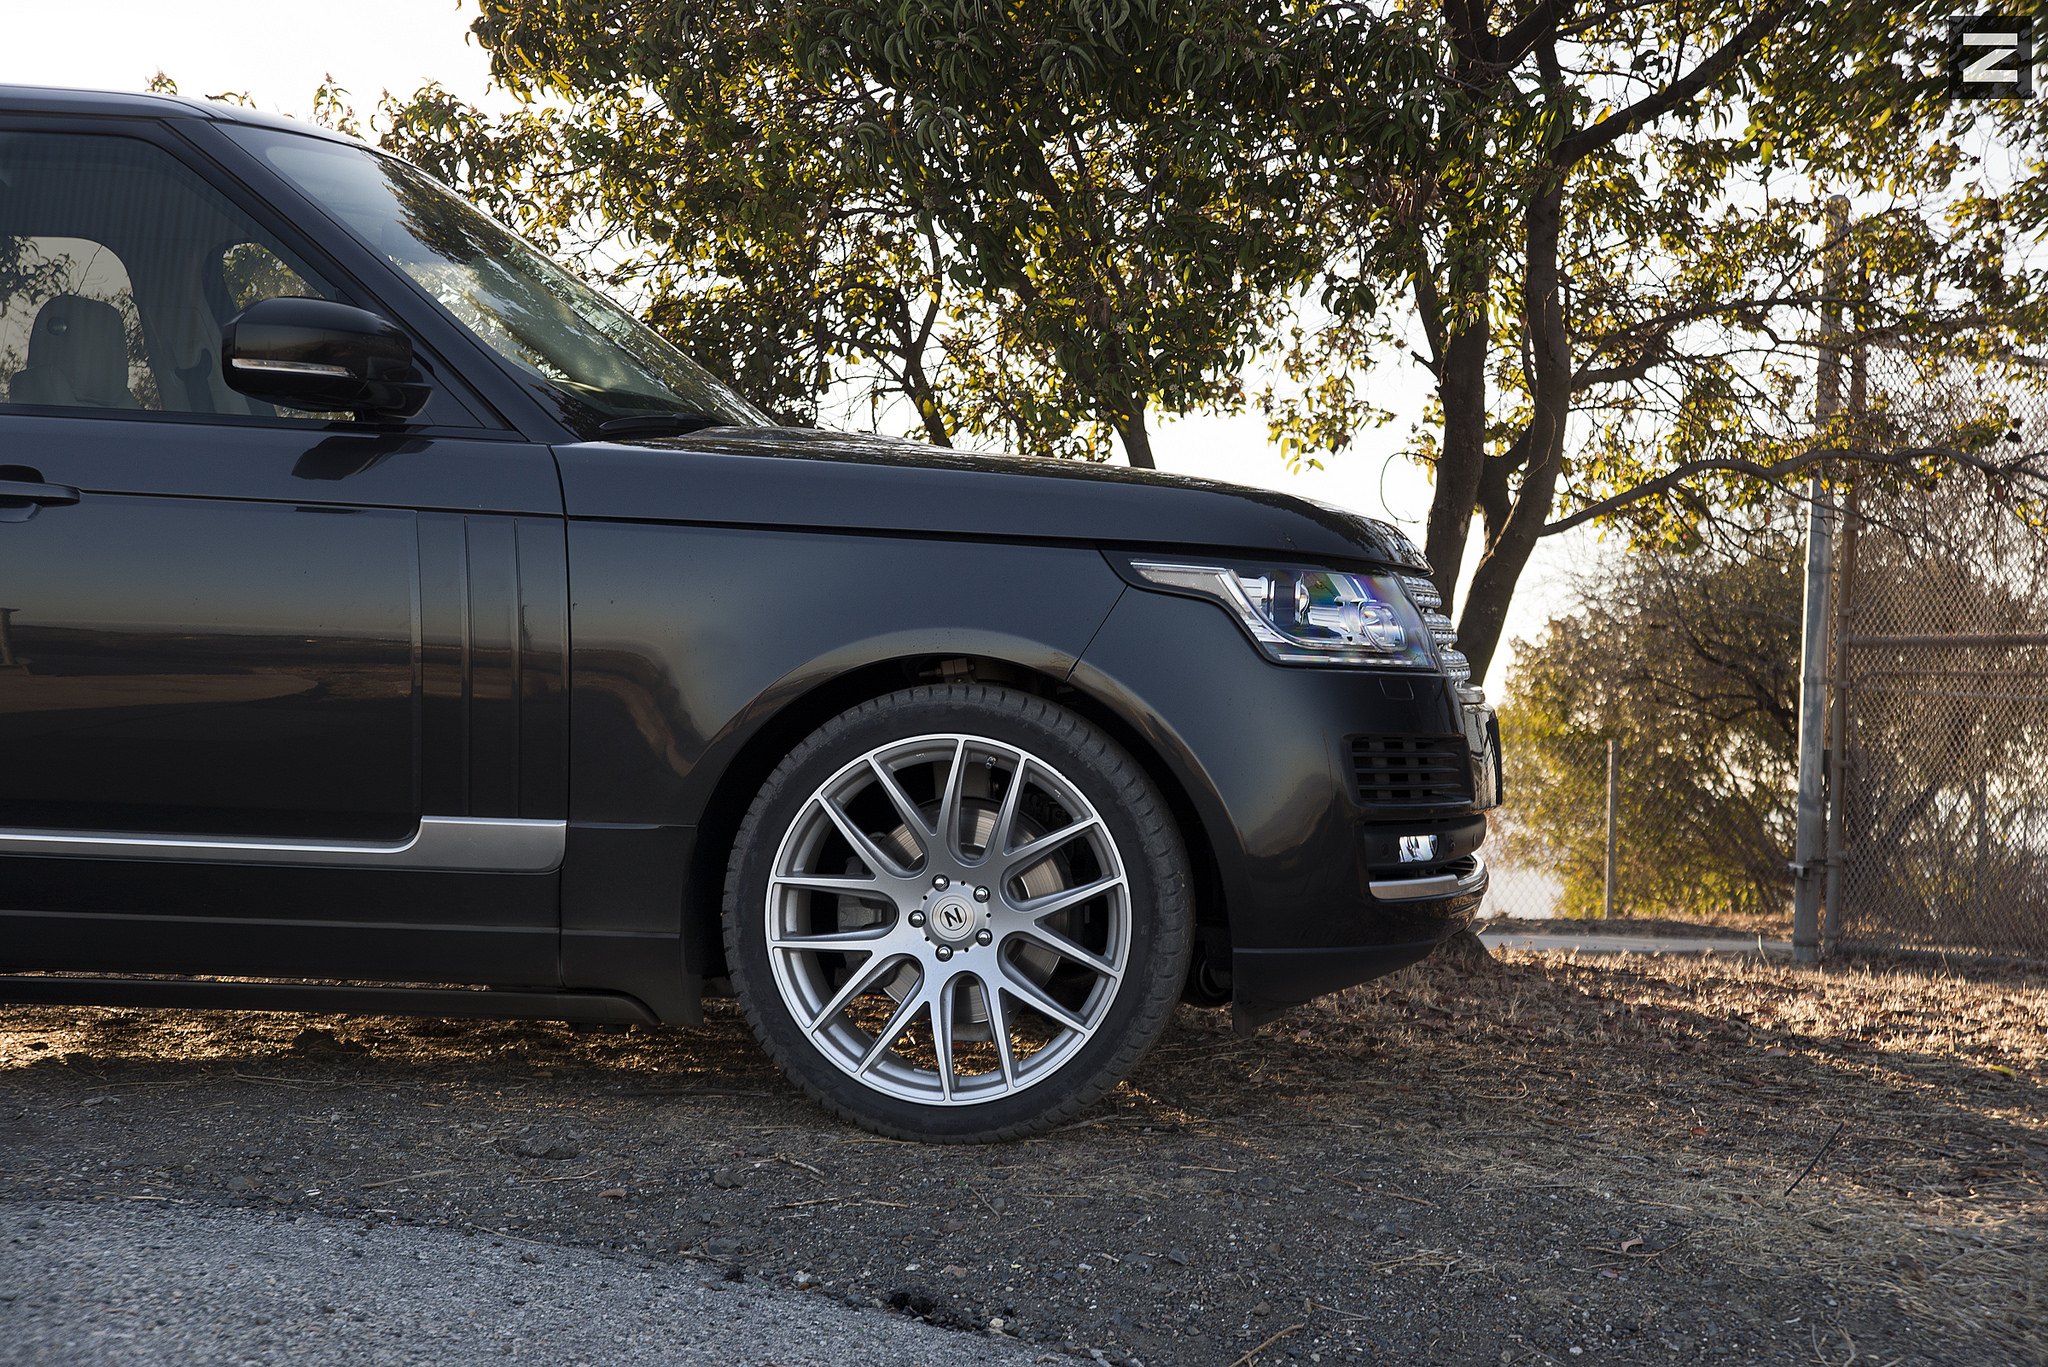 Aftermarket Running Boards on Black Range Rover - Photo by Zito Wheels